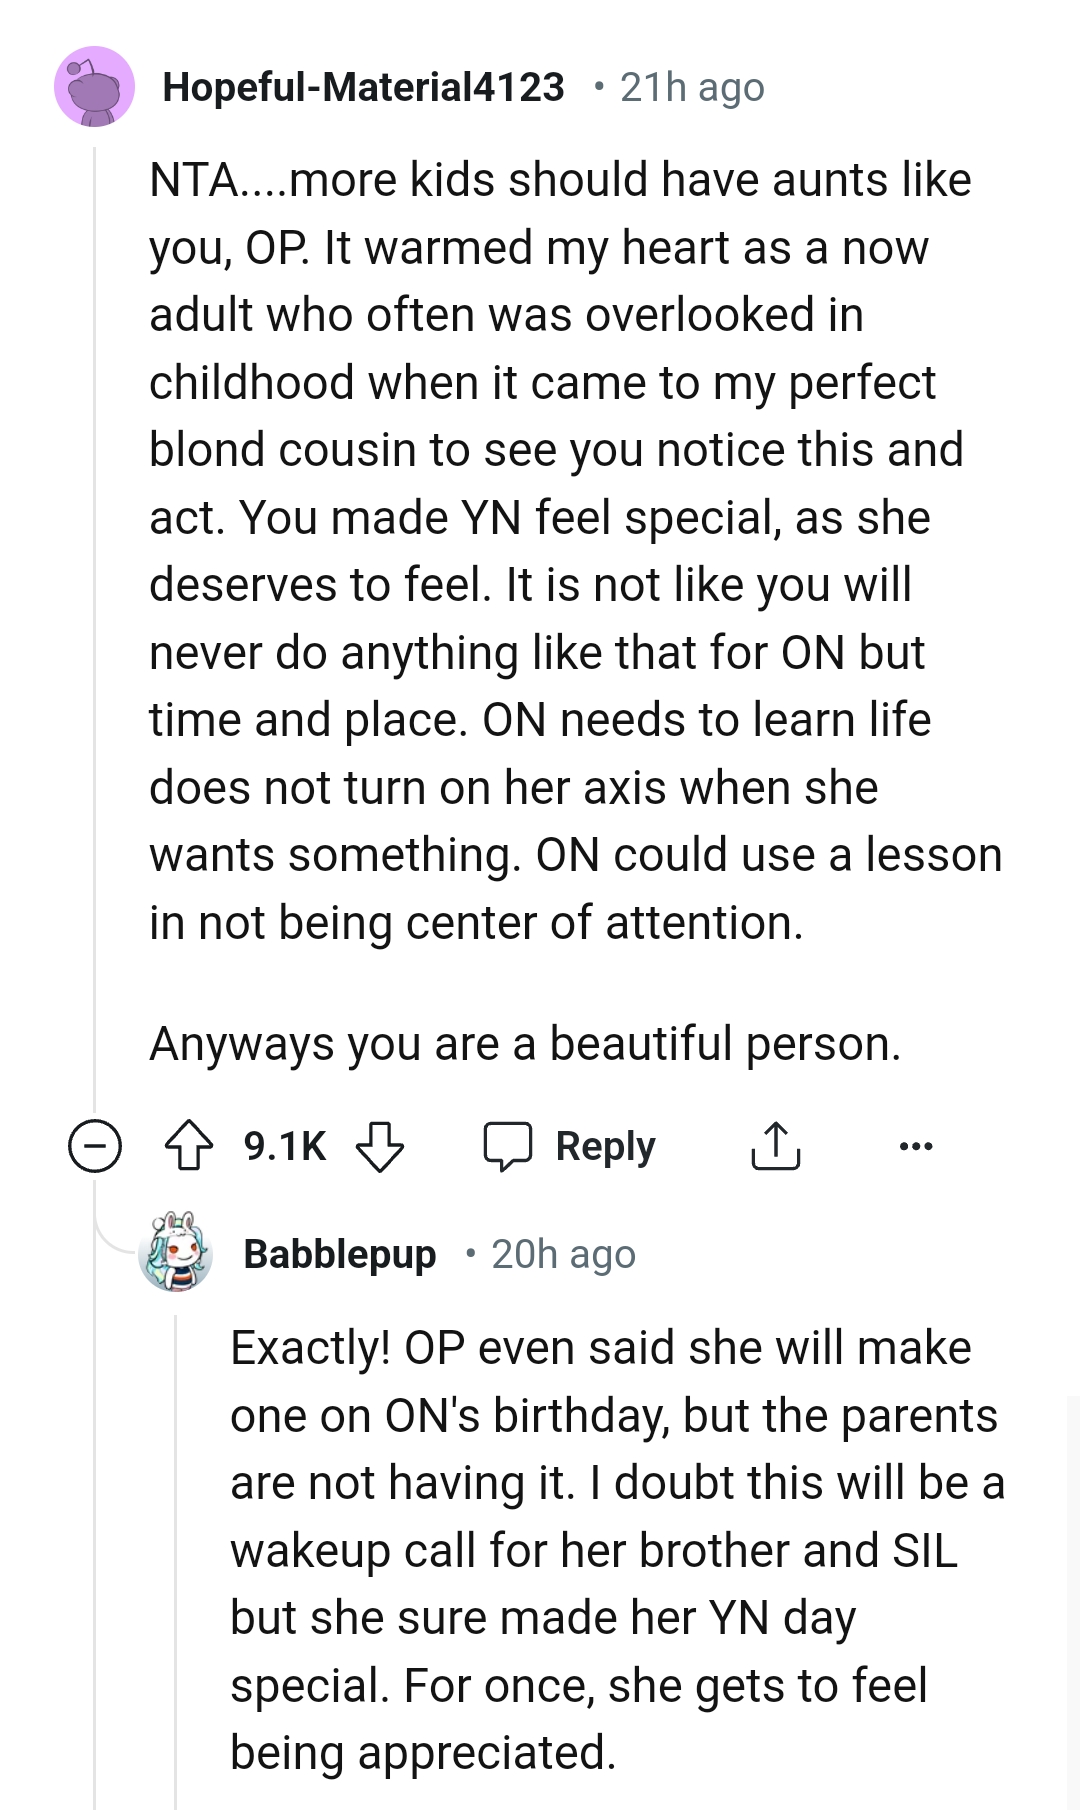 The OP is a lovely aunt